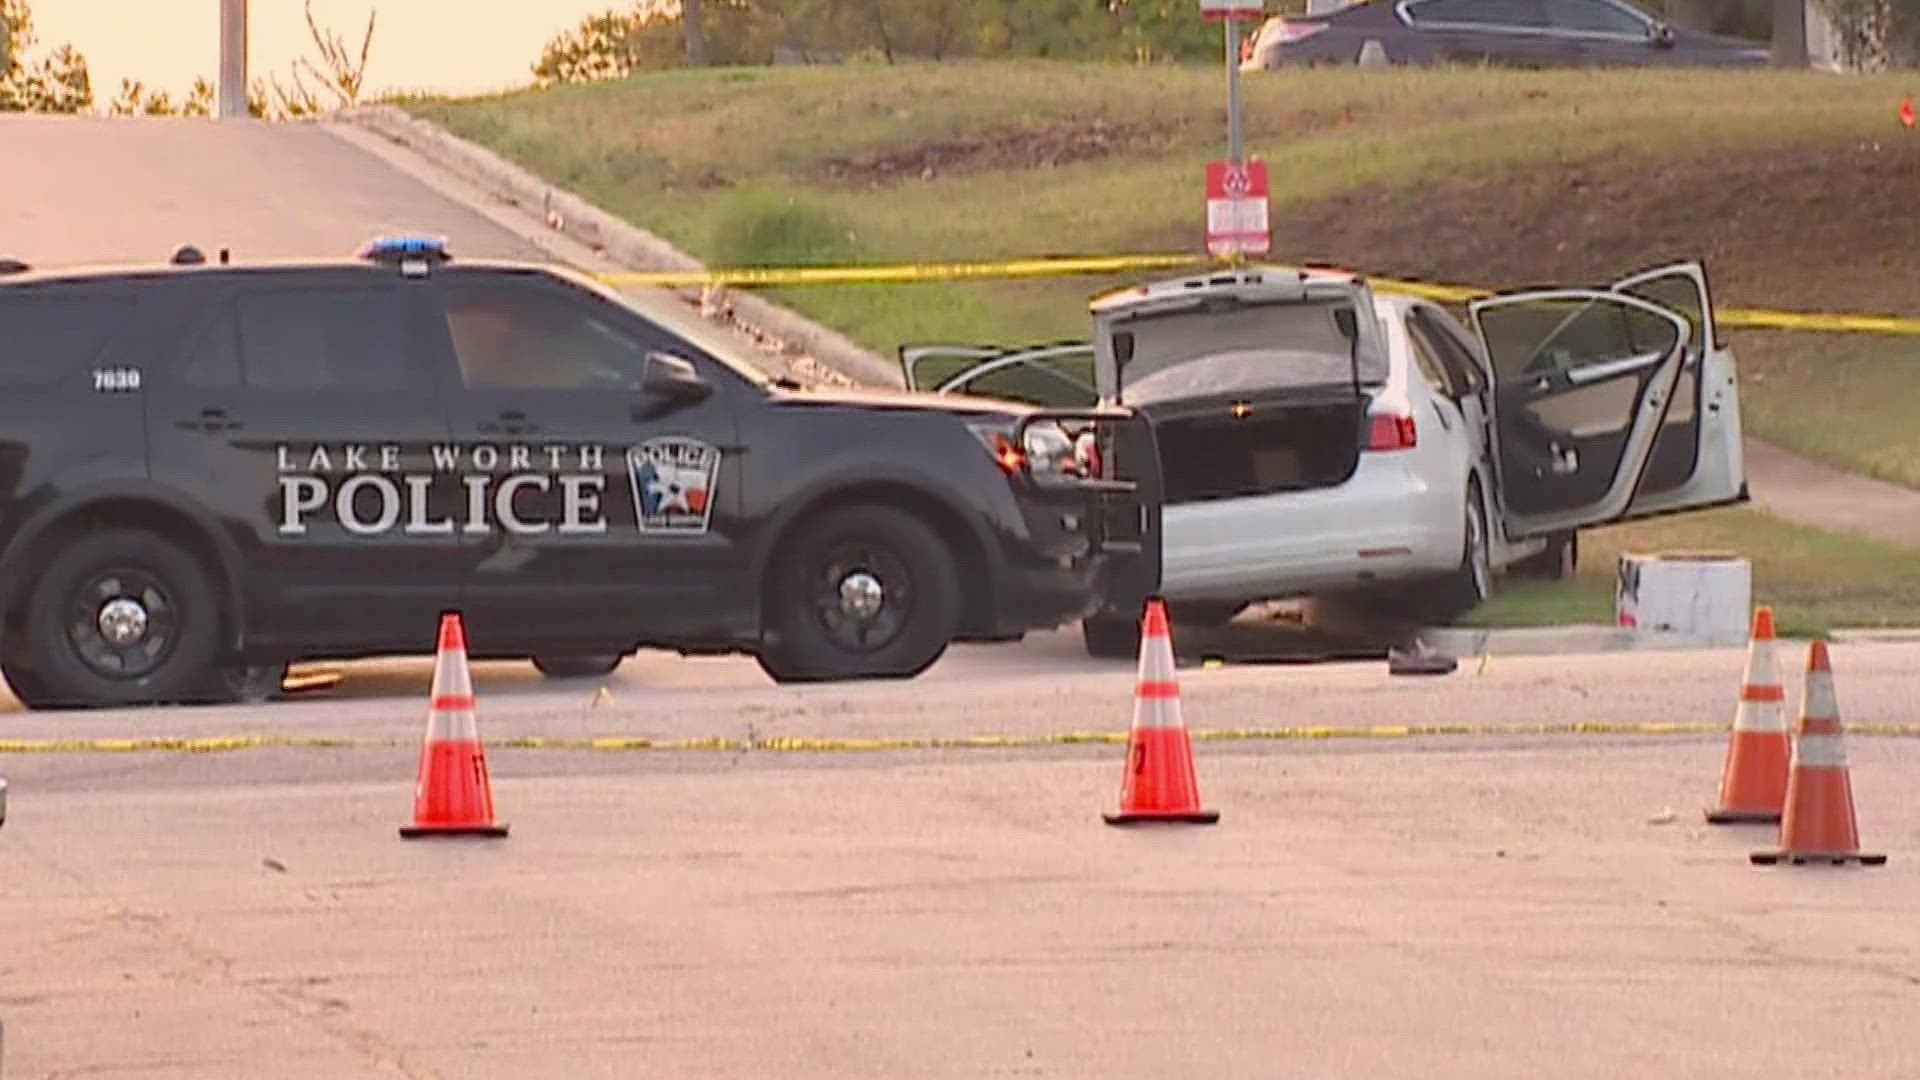 Lake Worth police officer fatally shot a person after they allegedly pointed a gun at officers during a chase in Fort Worth, officials said.